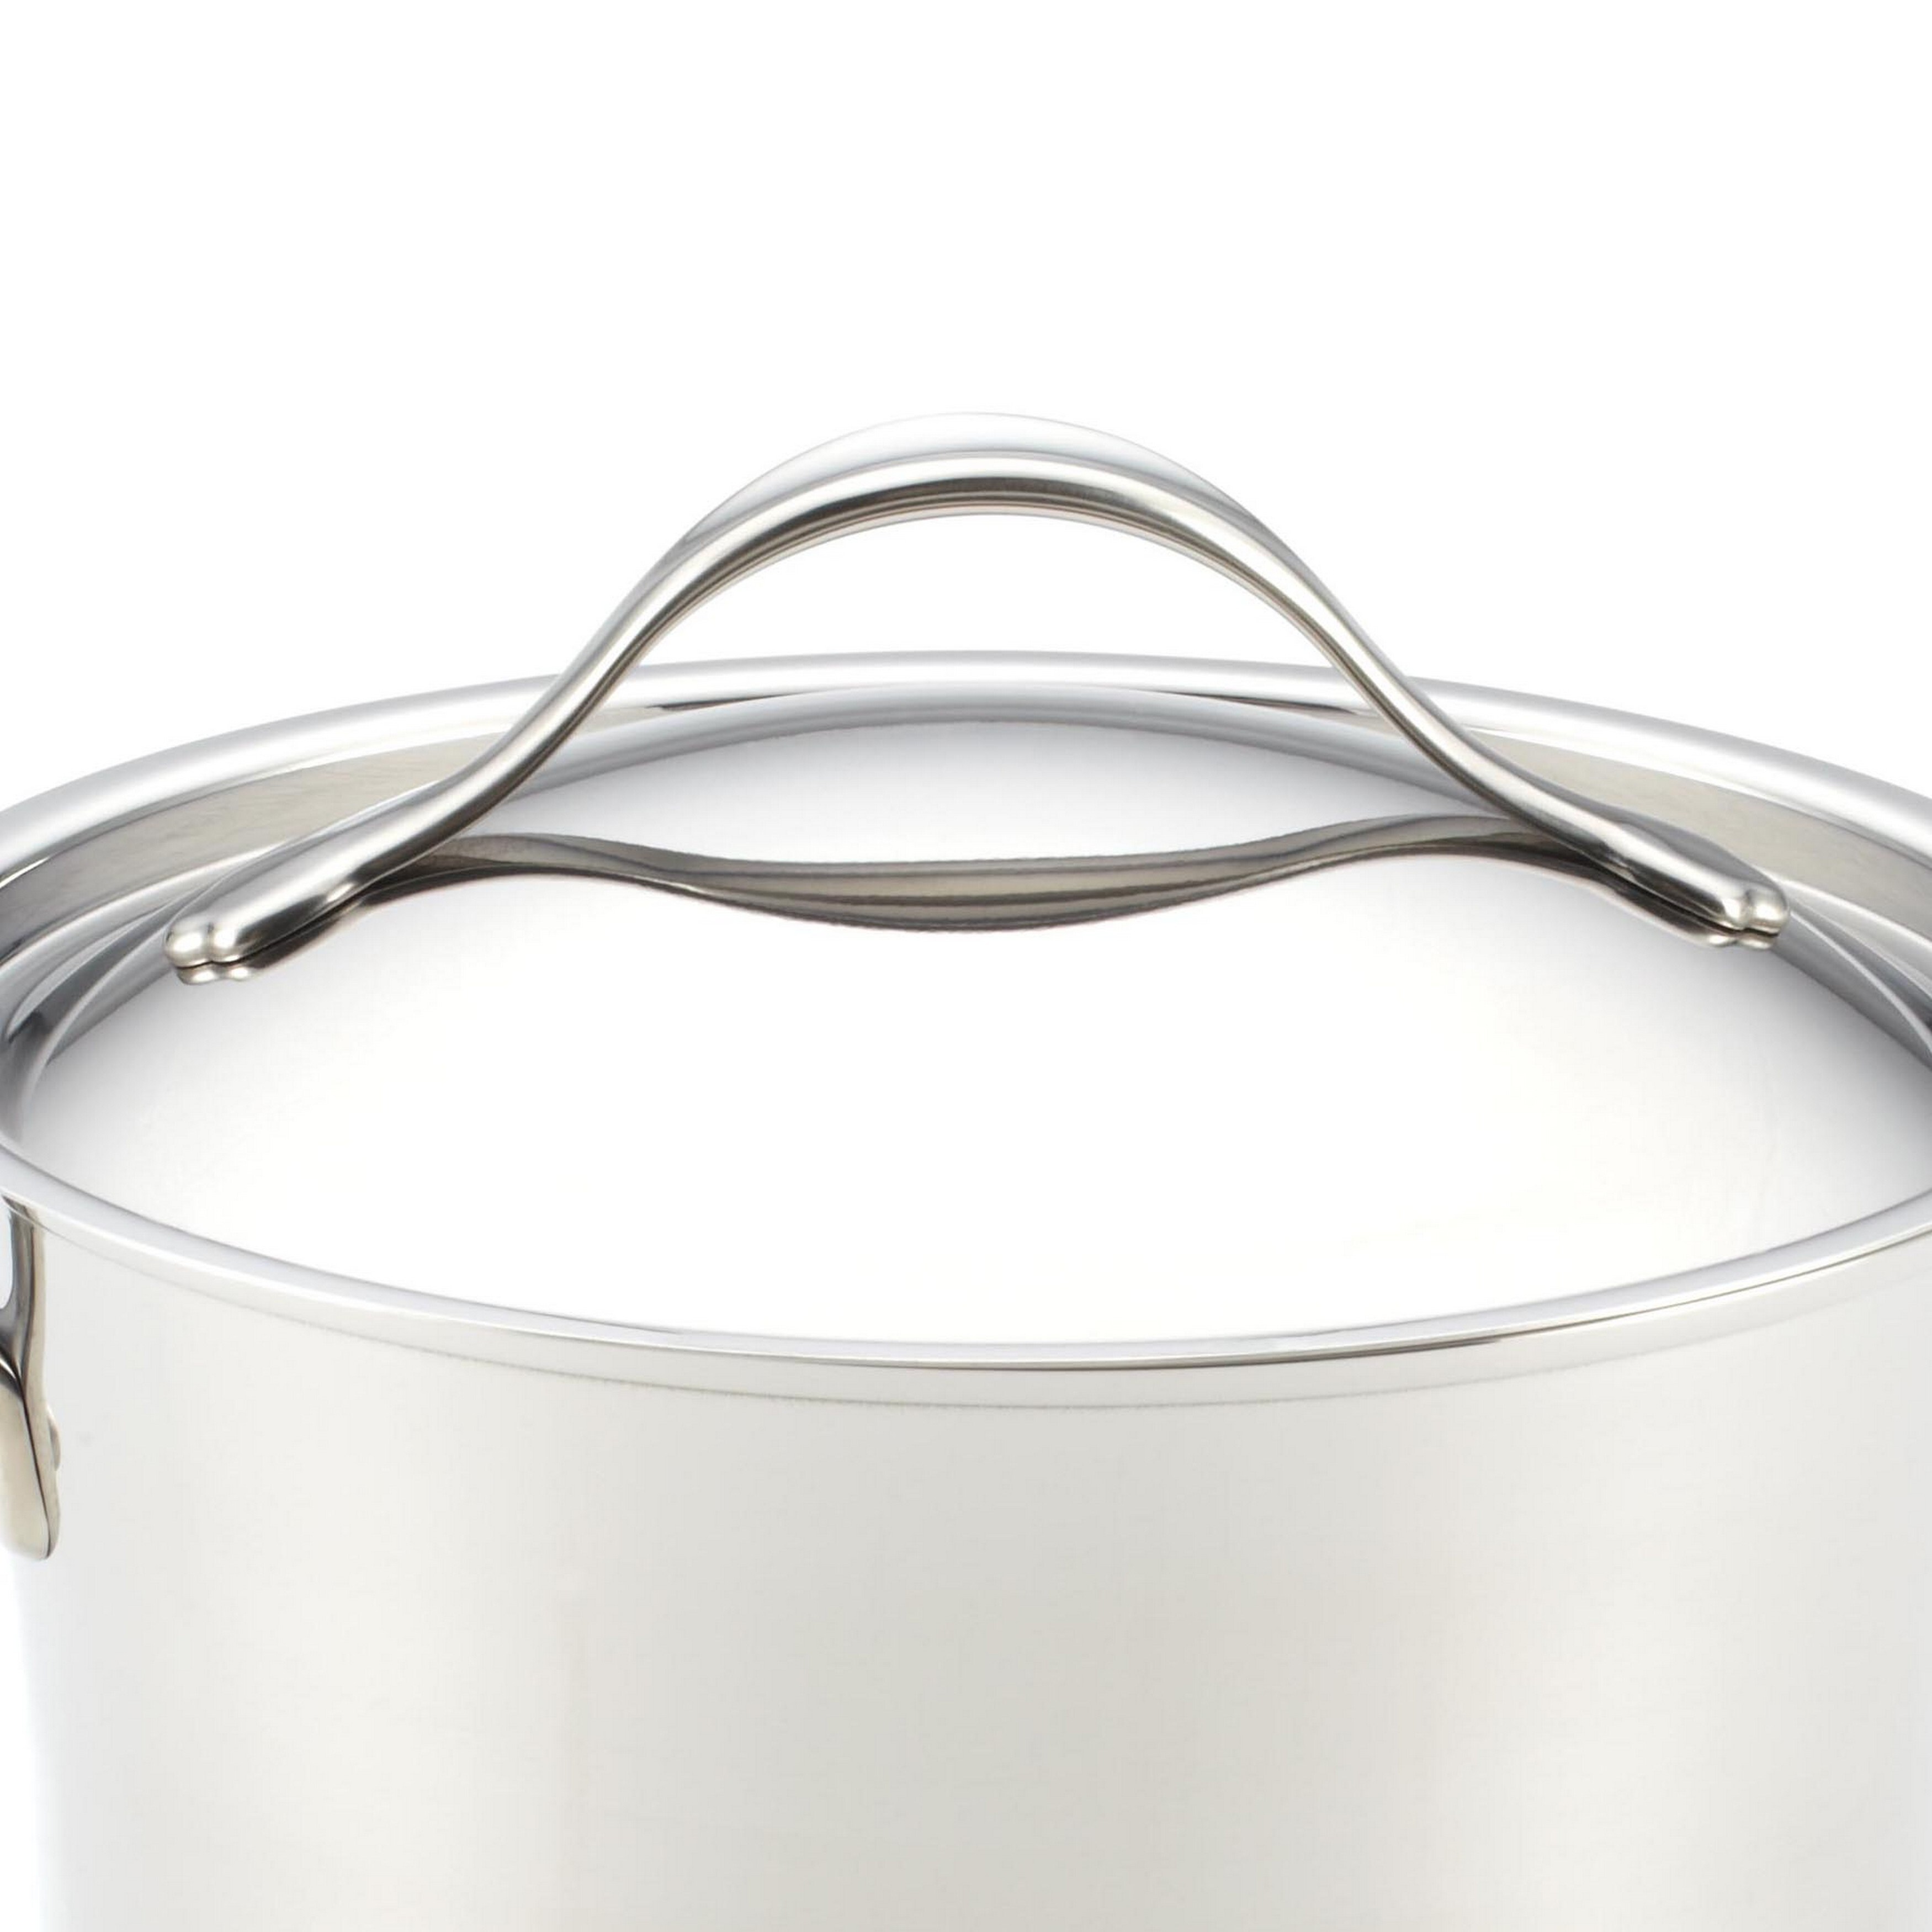 https://ak1.ostkcdn.com/images/products/9206701/Anolon-Nouvelle-Copper-Stainless-Steel-3.5-quart-Covered-Saucepan-97843dde-aa3e-46db-aaa8-a196ee477e21.jpg